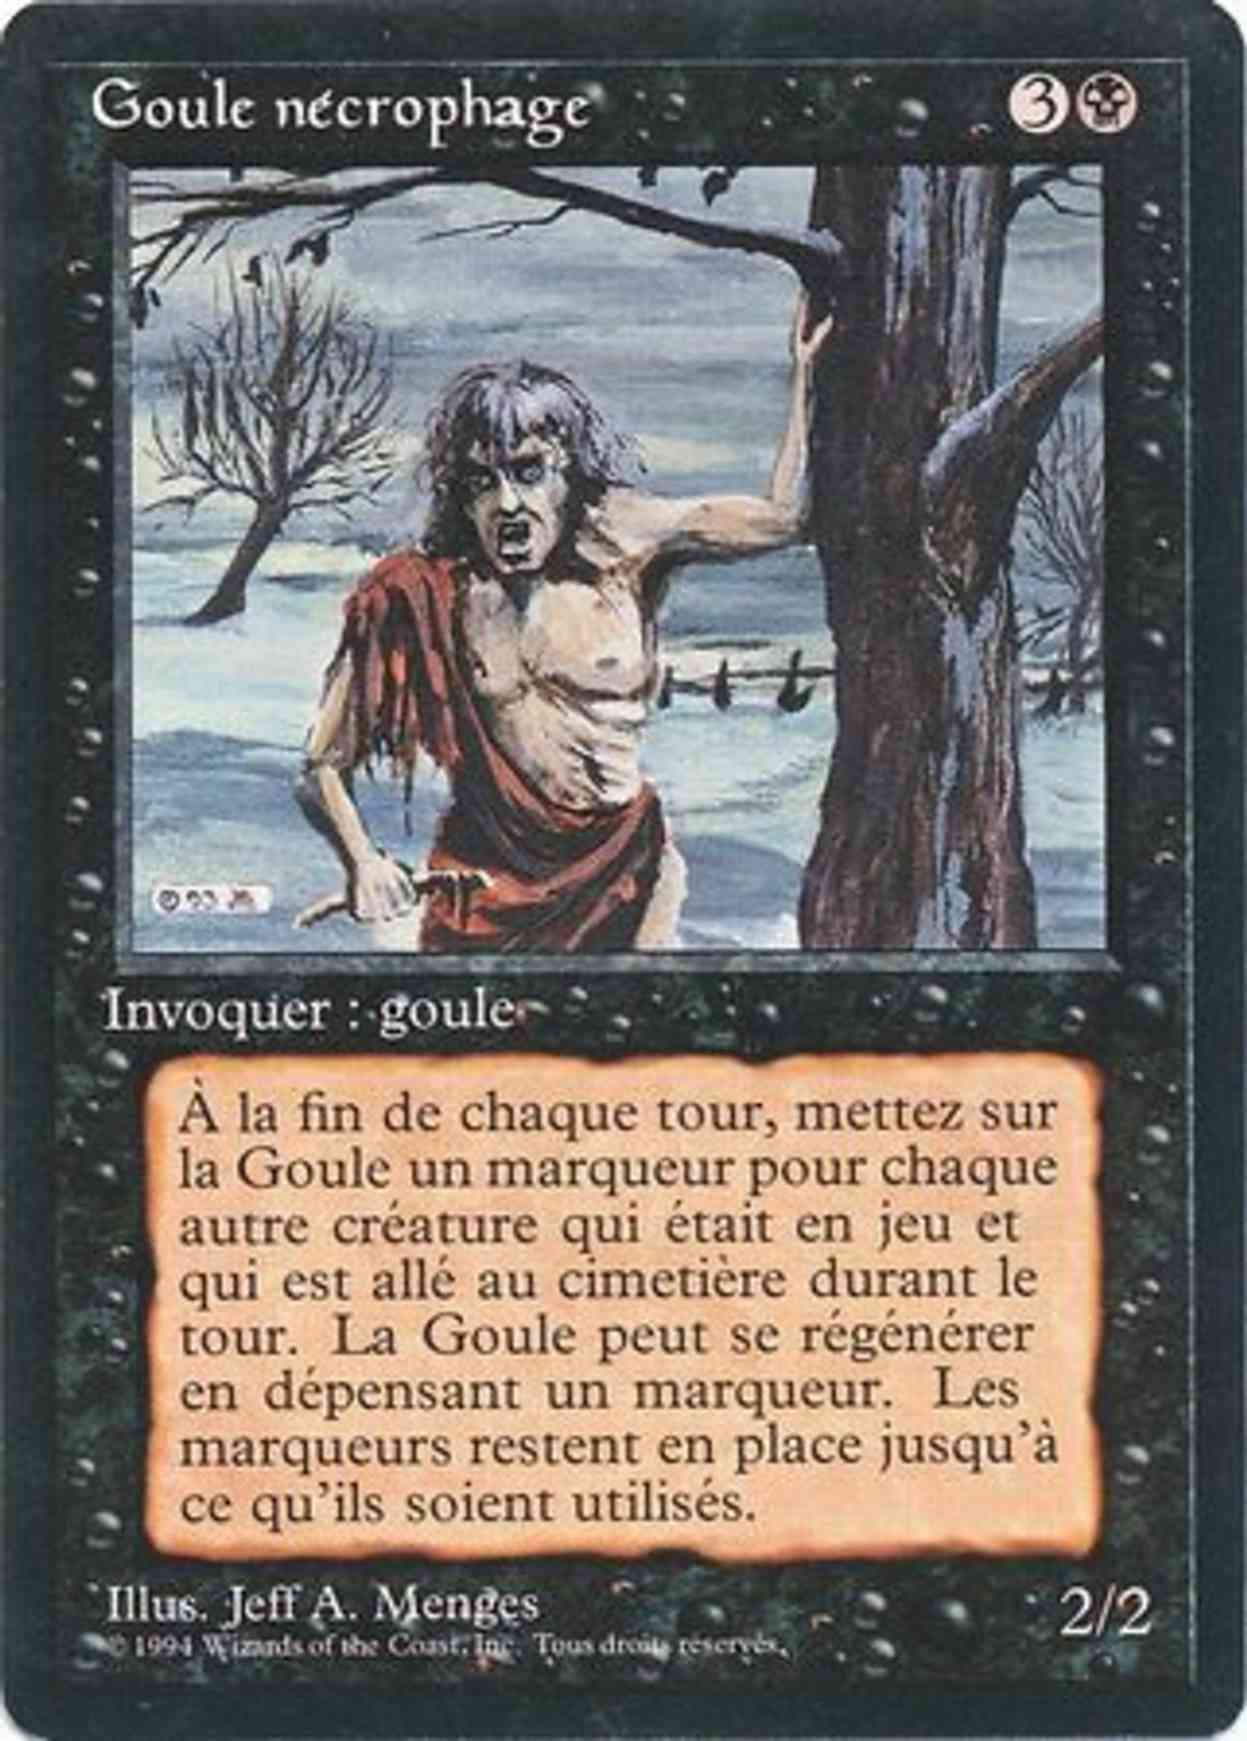 Scavenging Ghoul magic card front